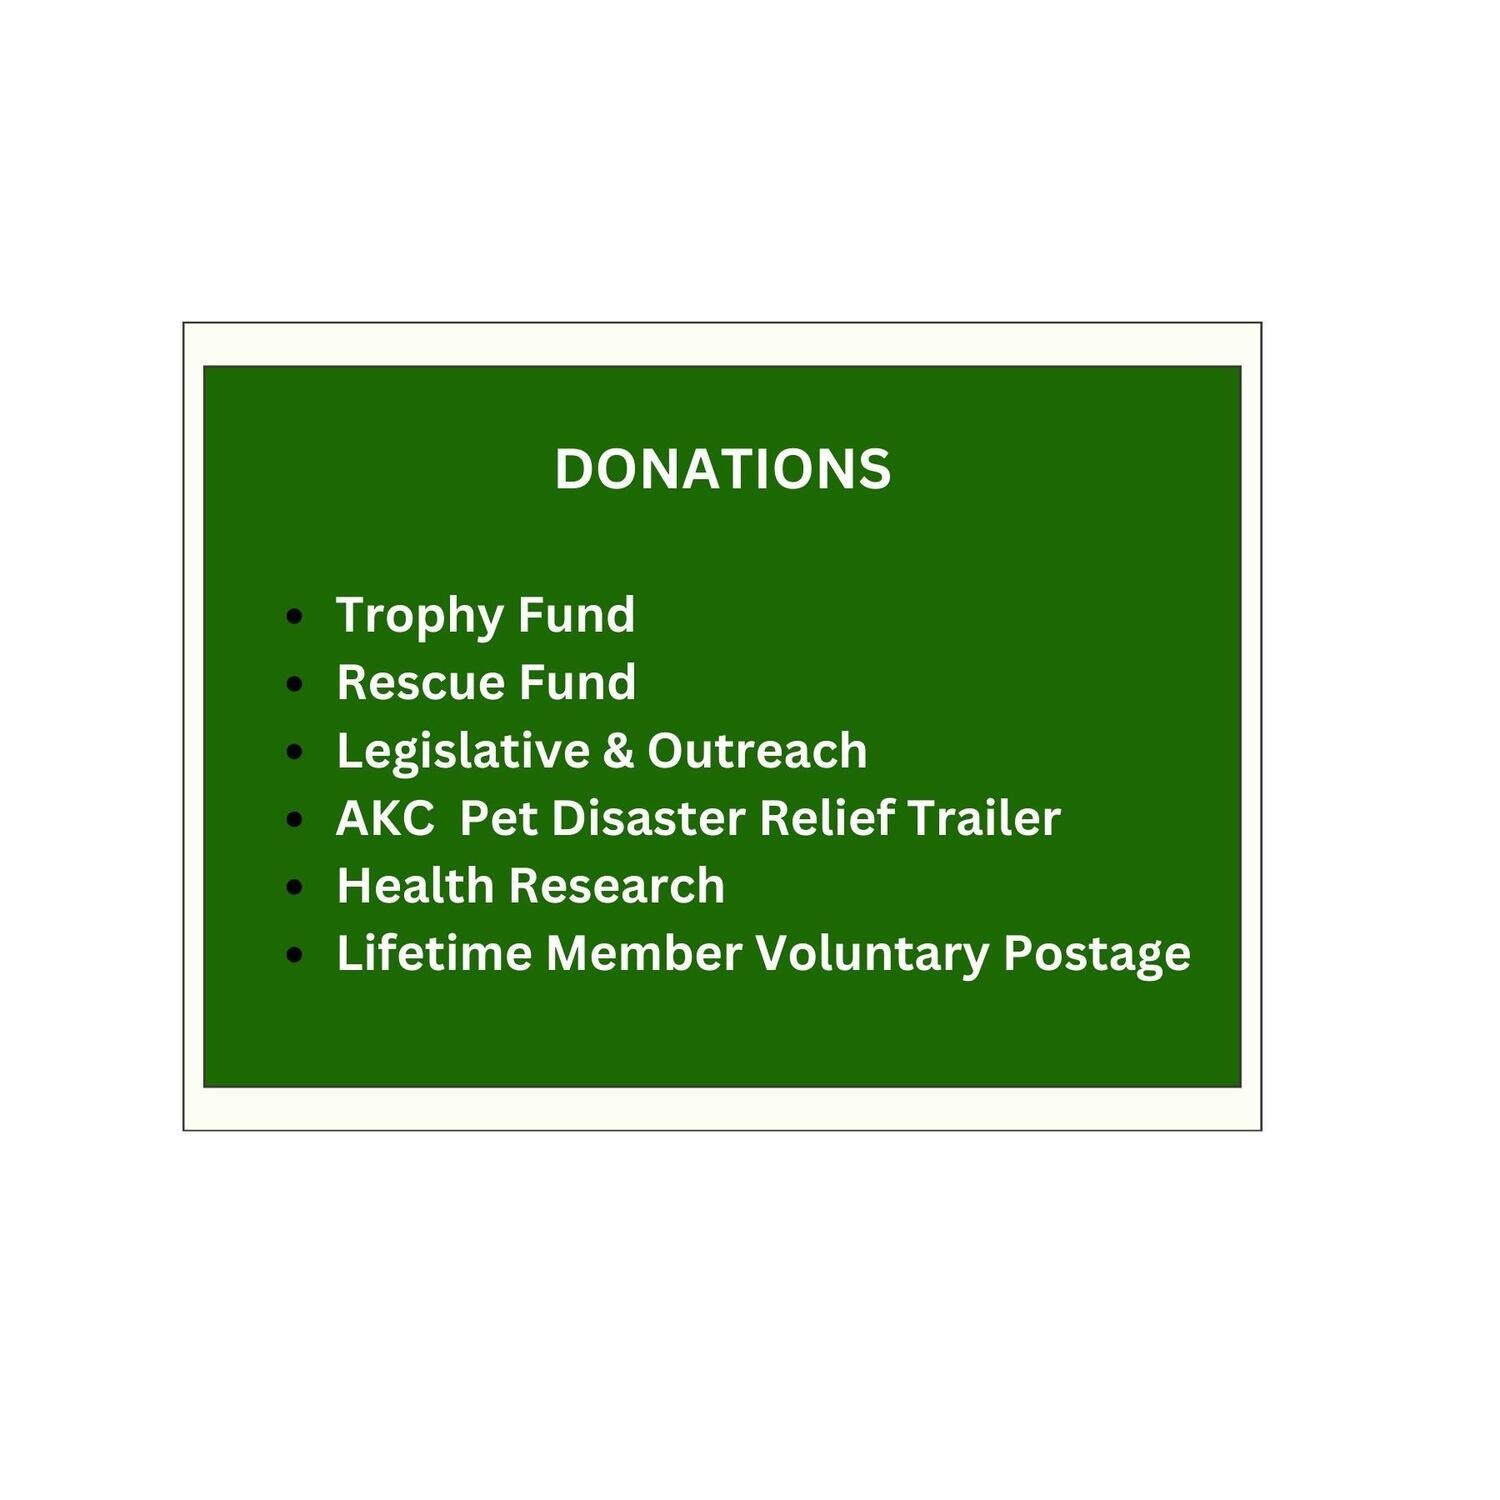 Donations and General Fund